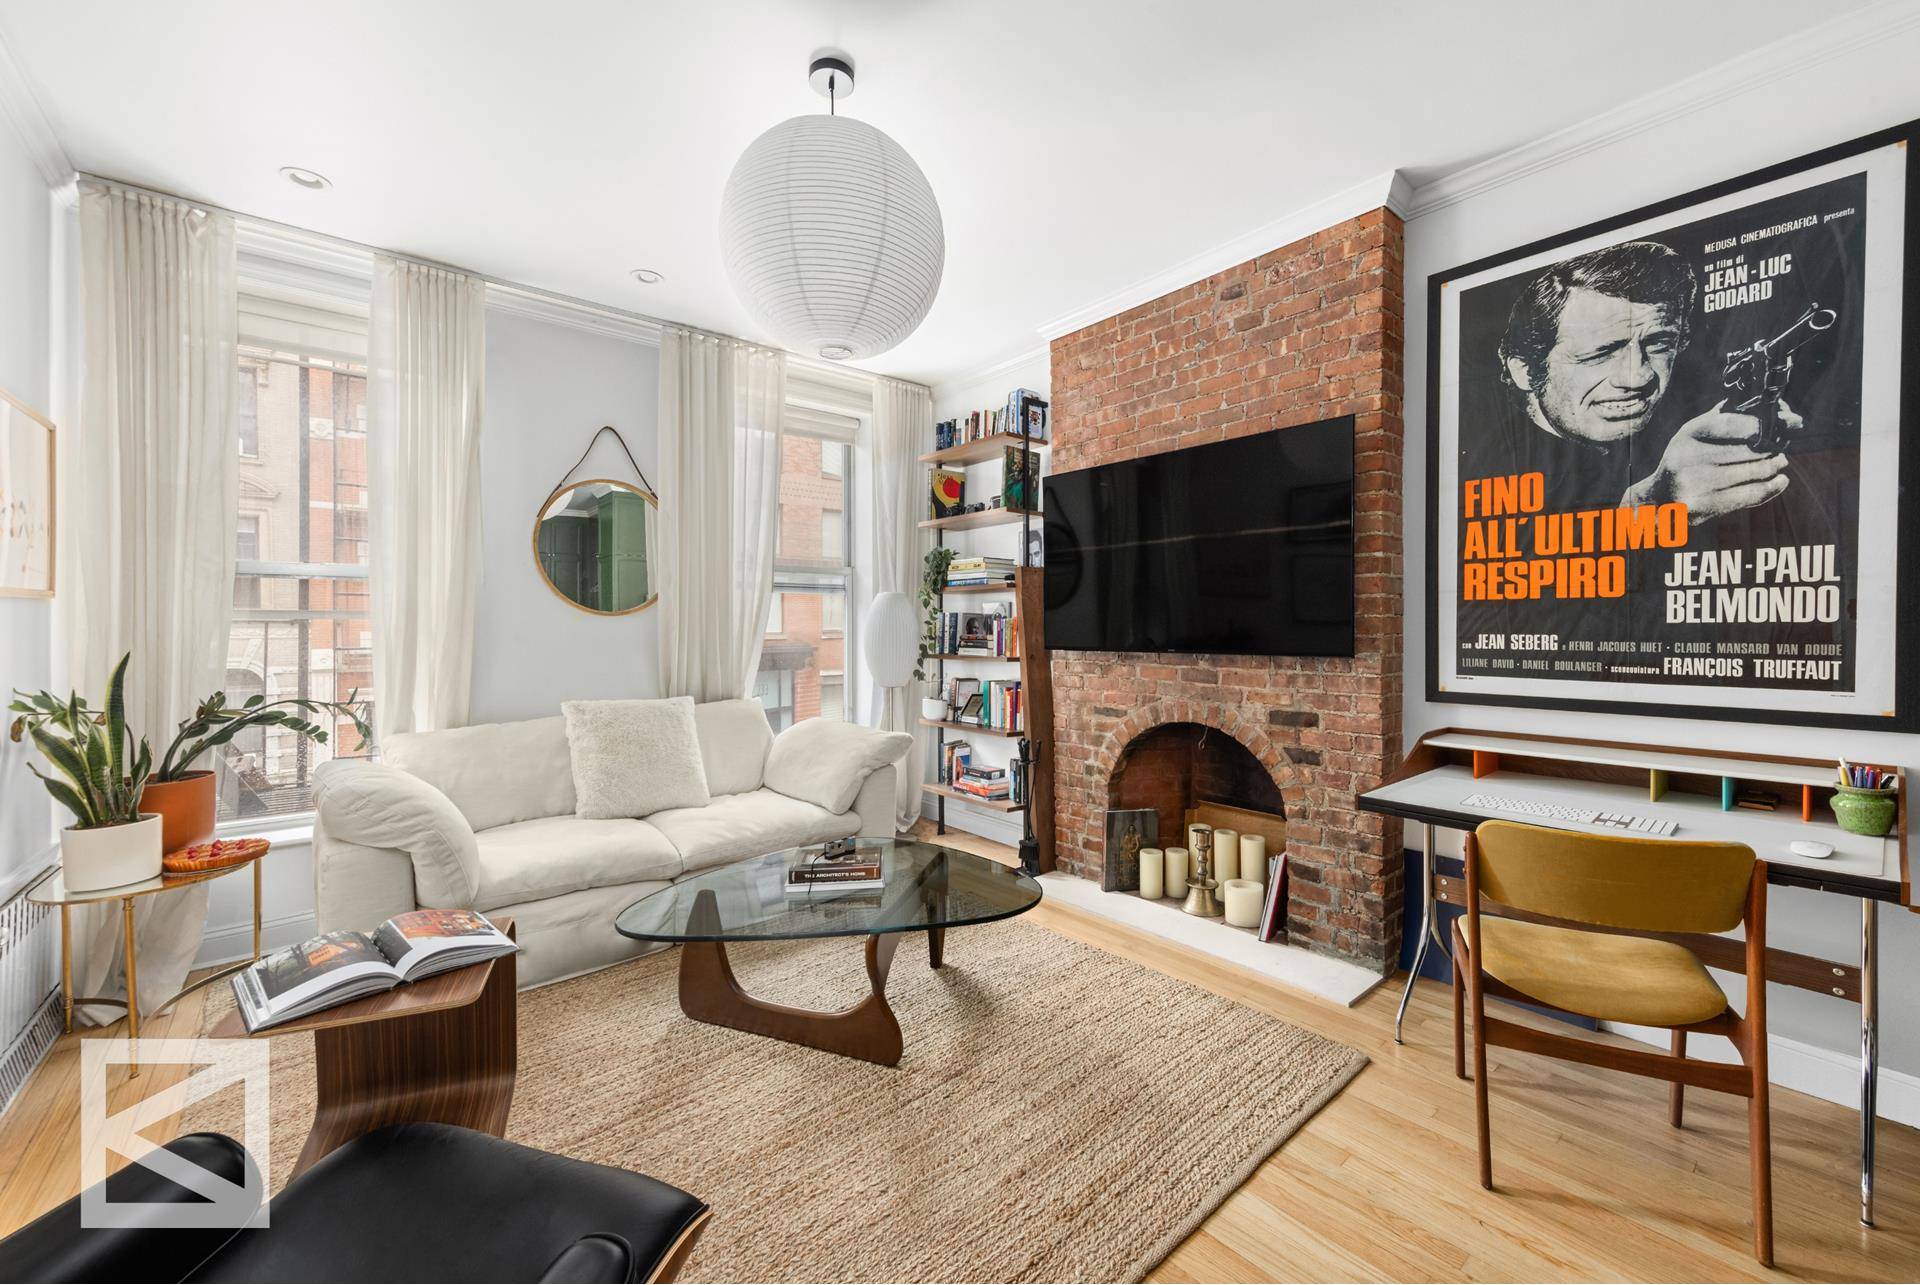 Discover the perfect blend of comfort and style in this one bedroom apartment located in the vibrant neighborhood of Chelsea.